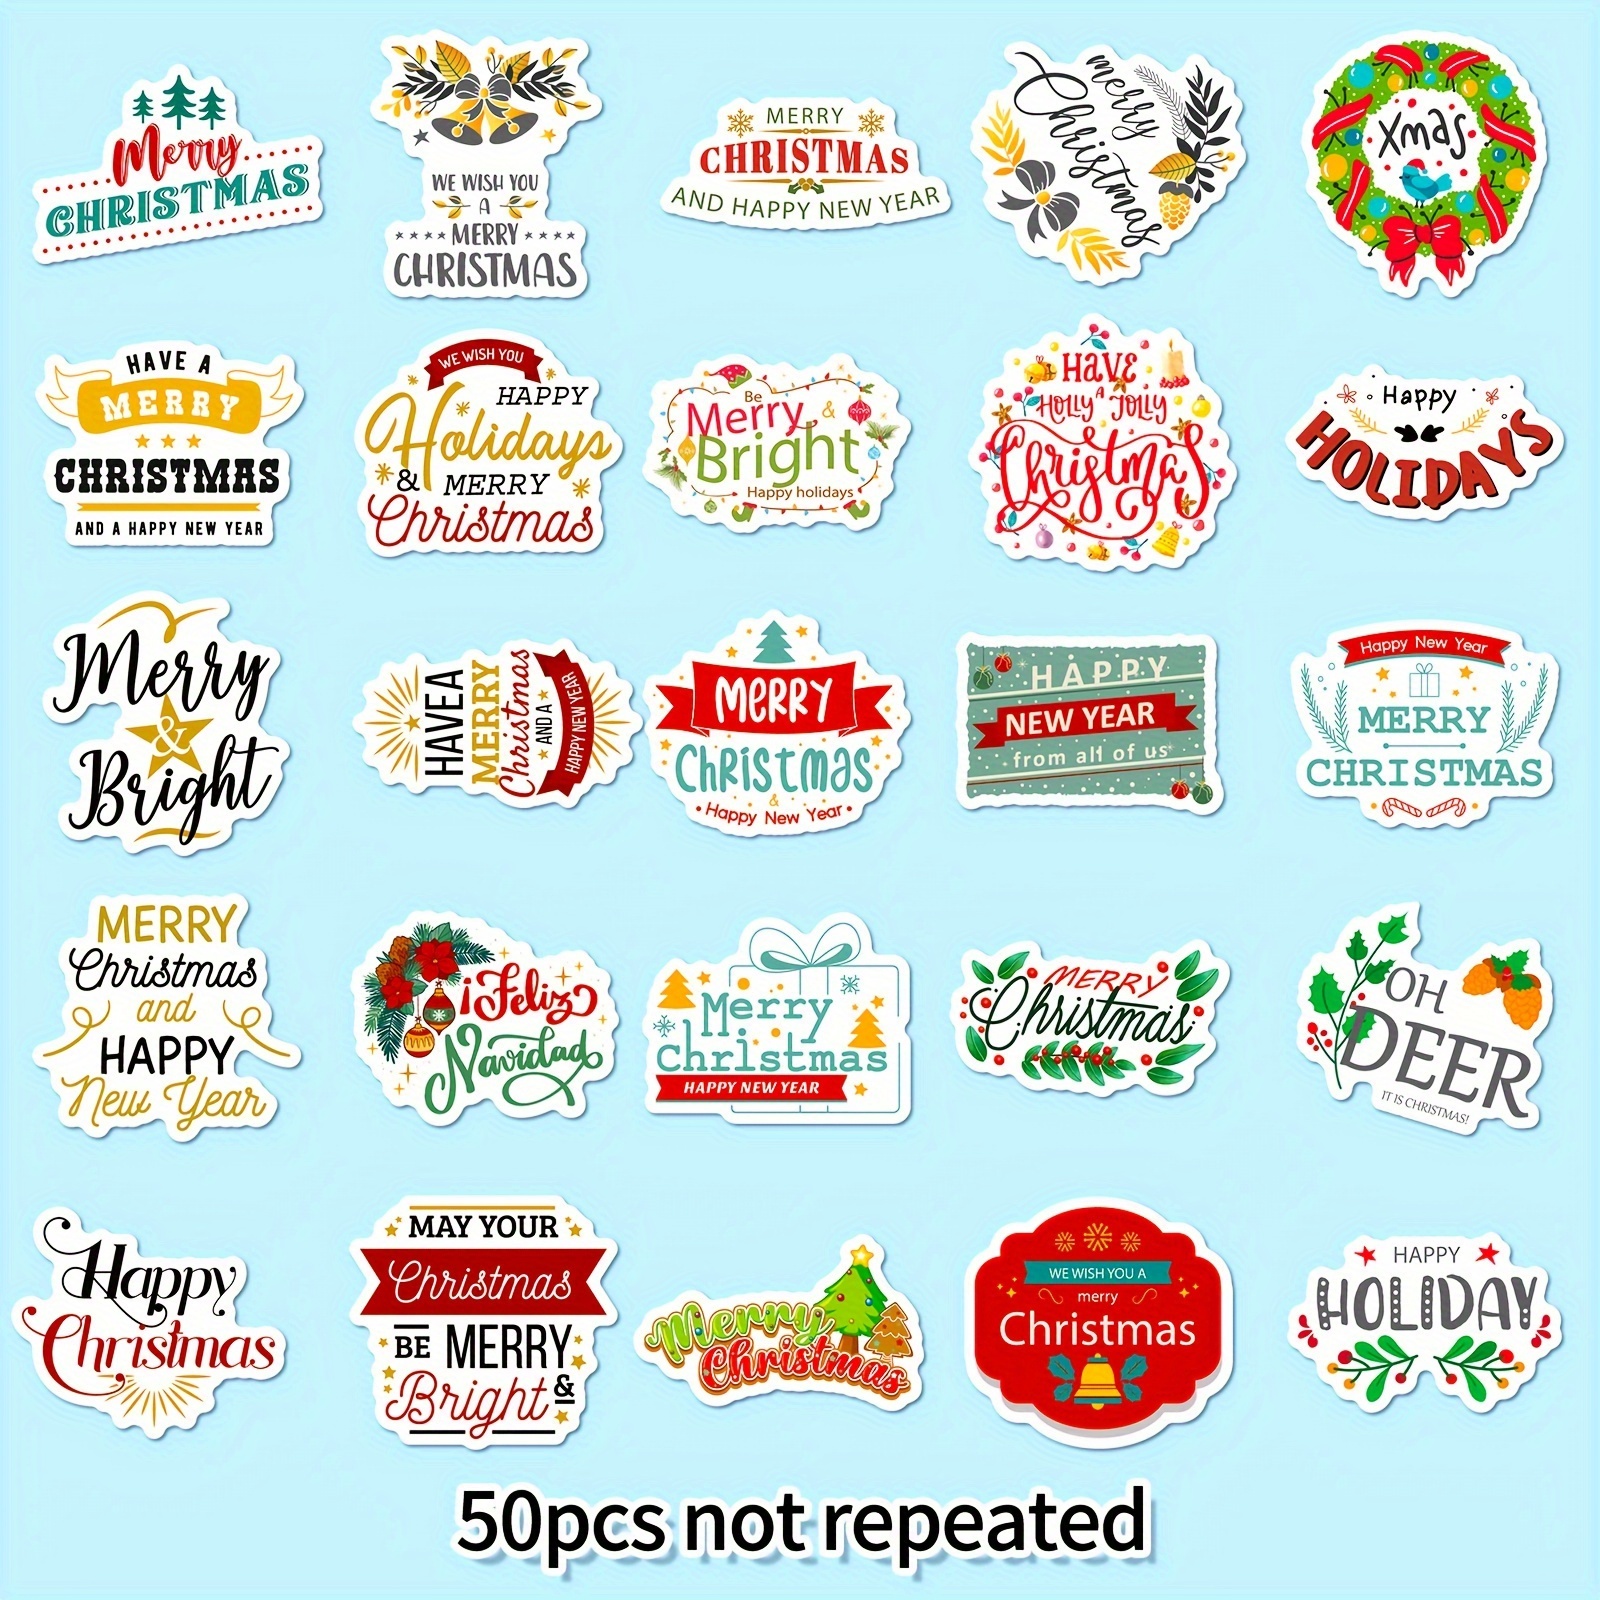 46PCS Christmas Party Stickers: Crafts, Labels Decorations